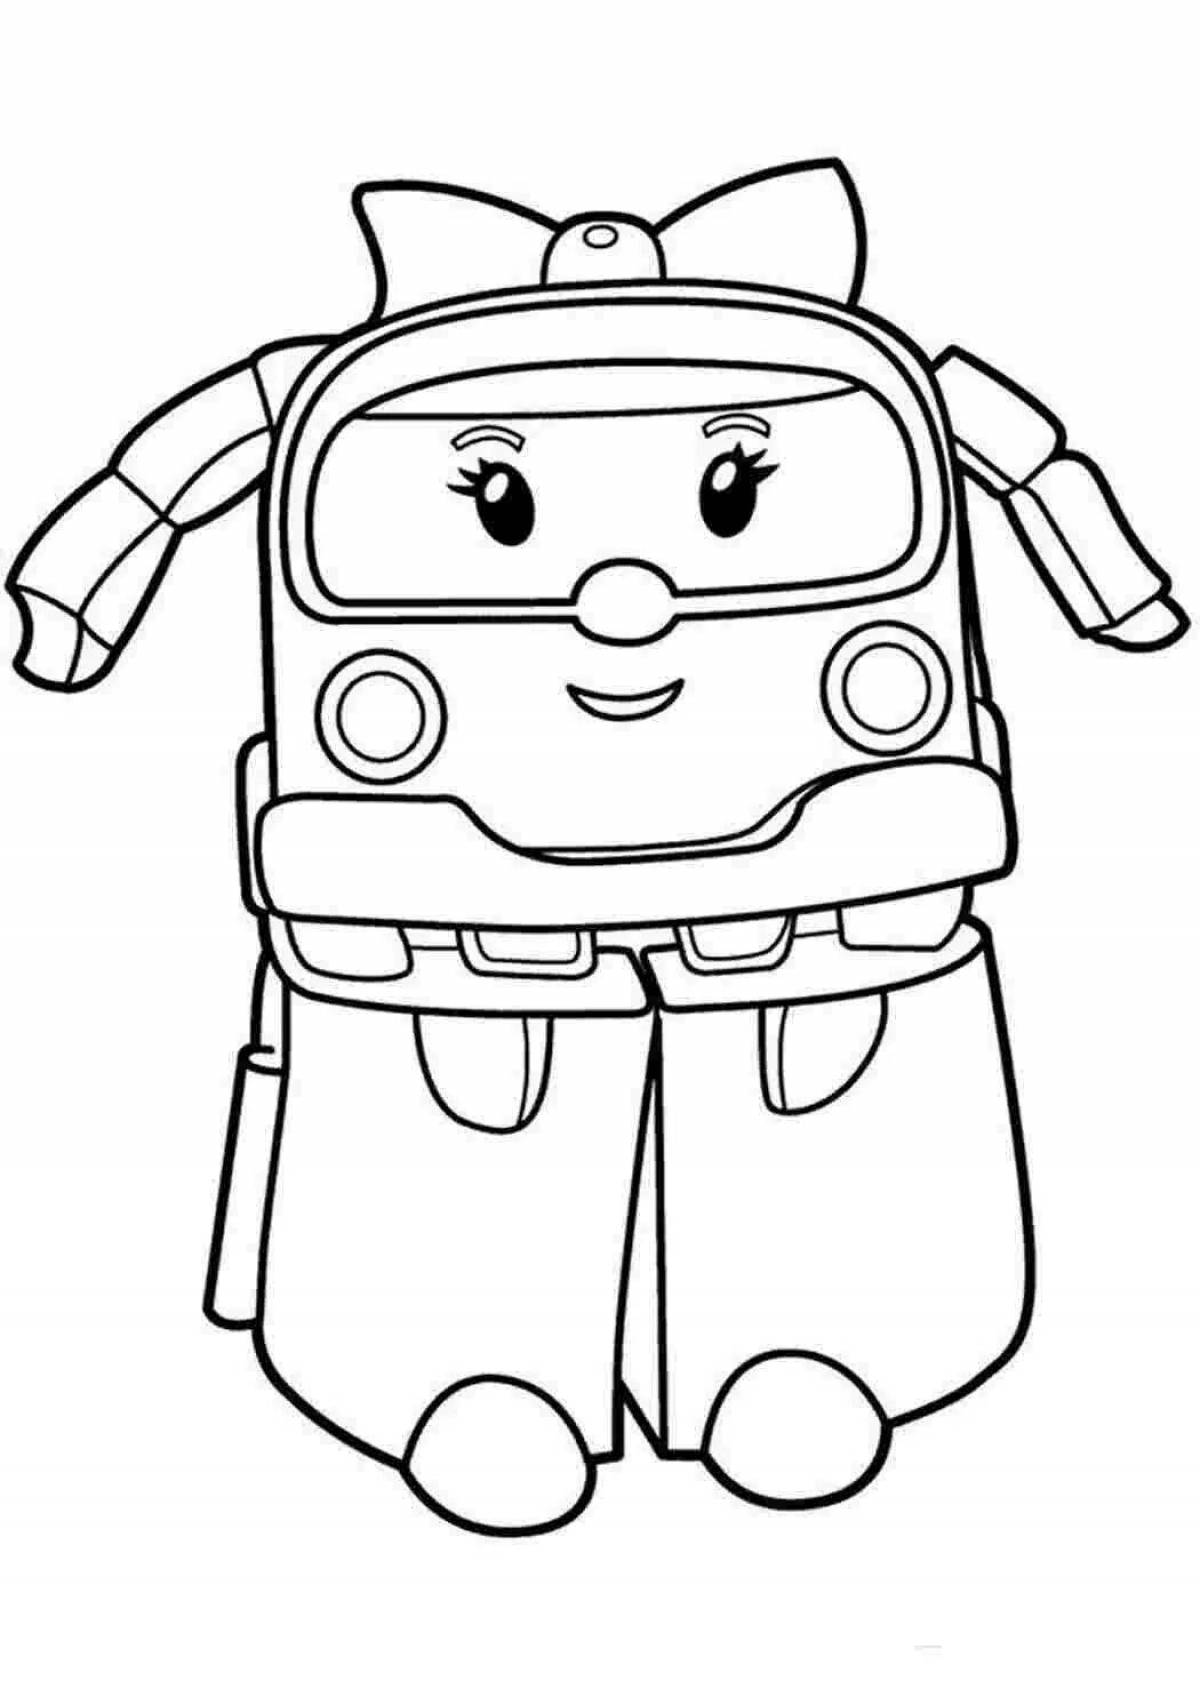 Robocar poly video colorful coloring page